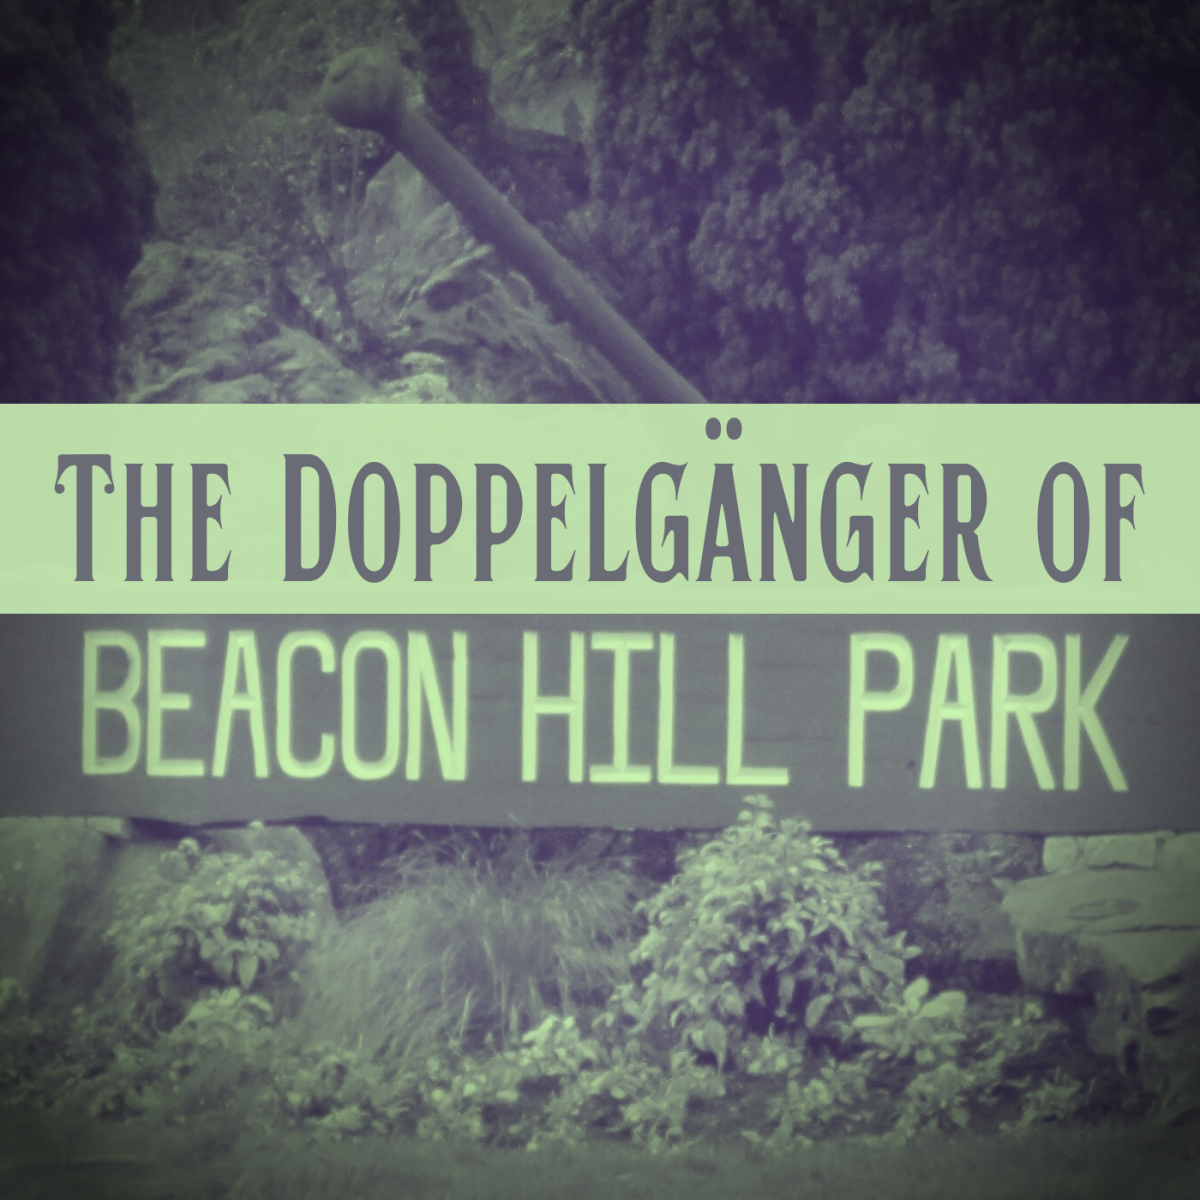 Doppelgänger of Beacon Hill Park: The Murder and Haunting